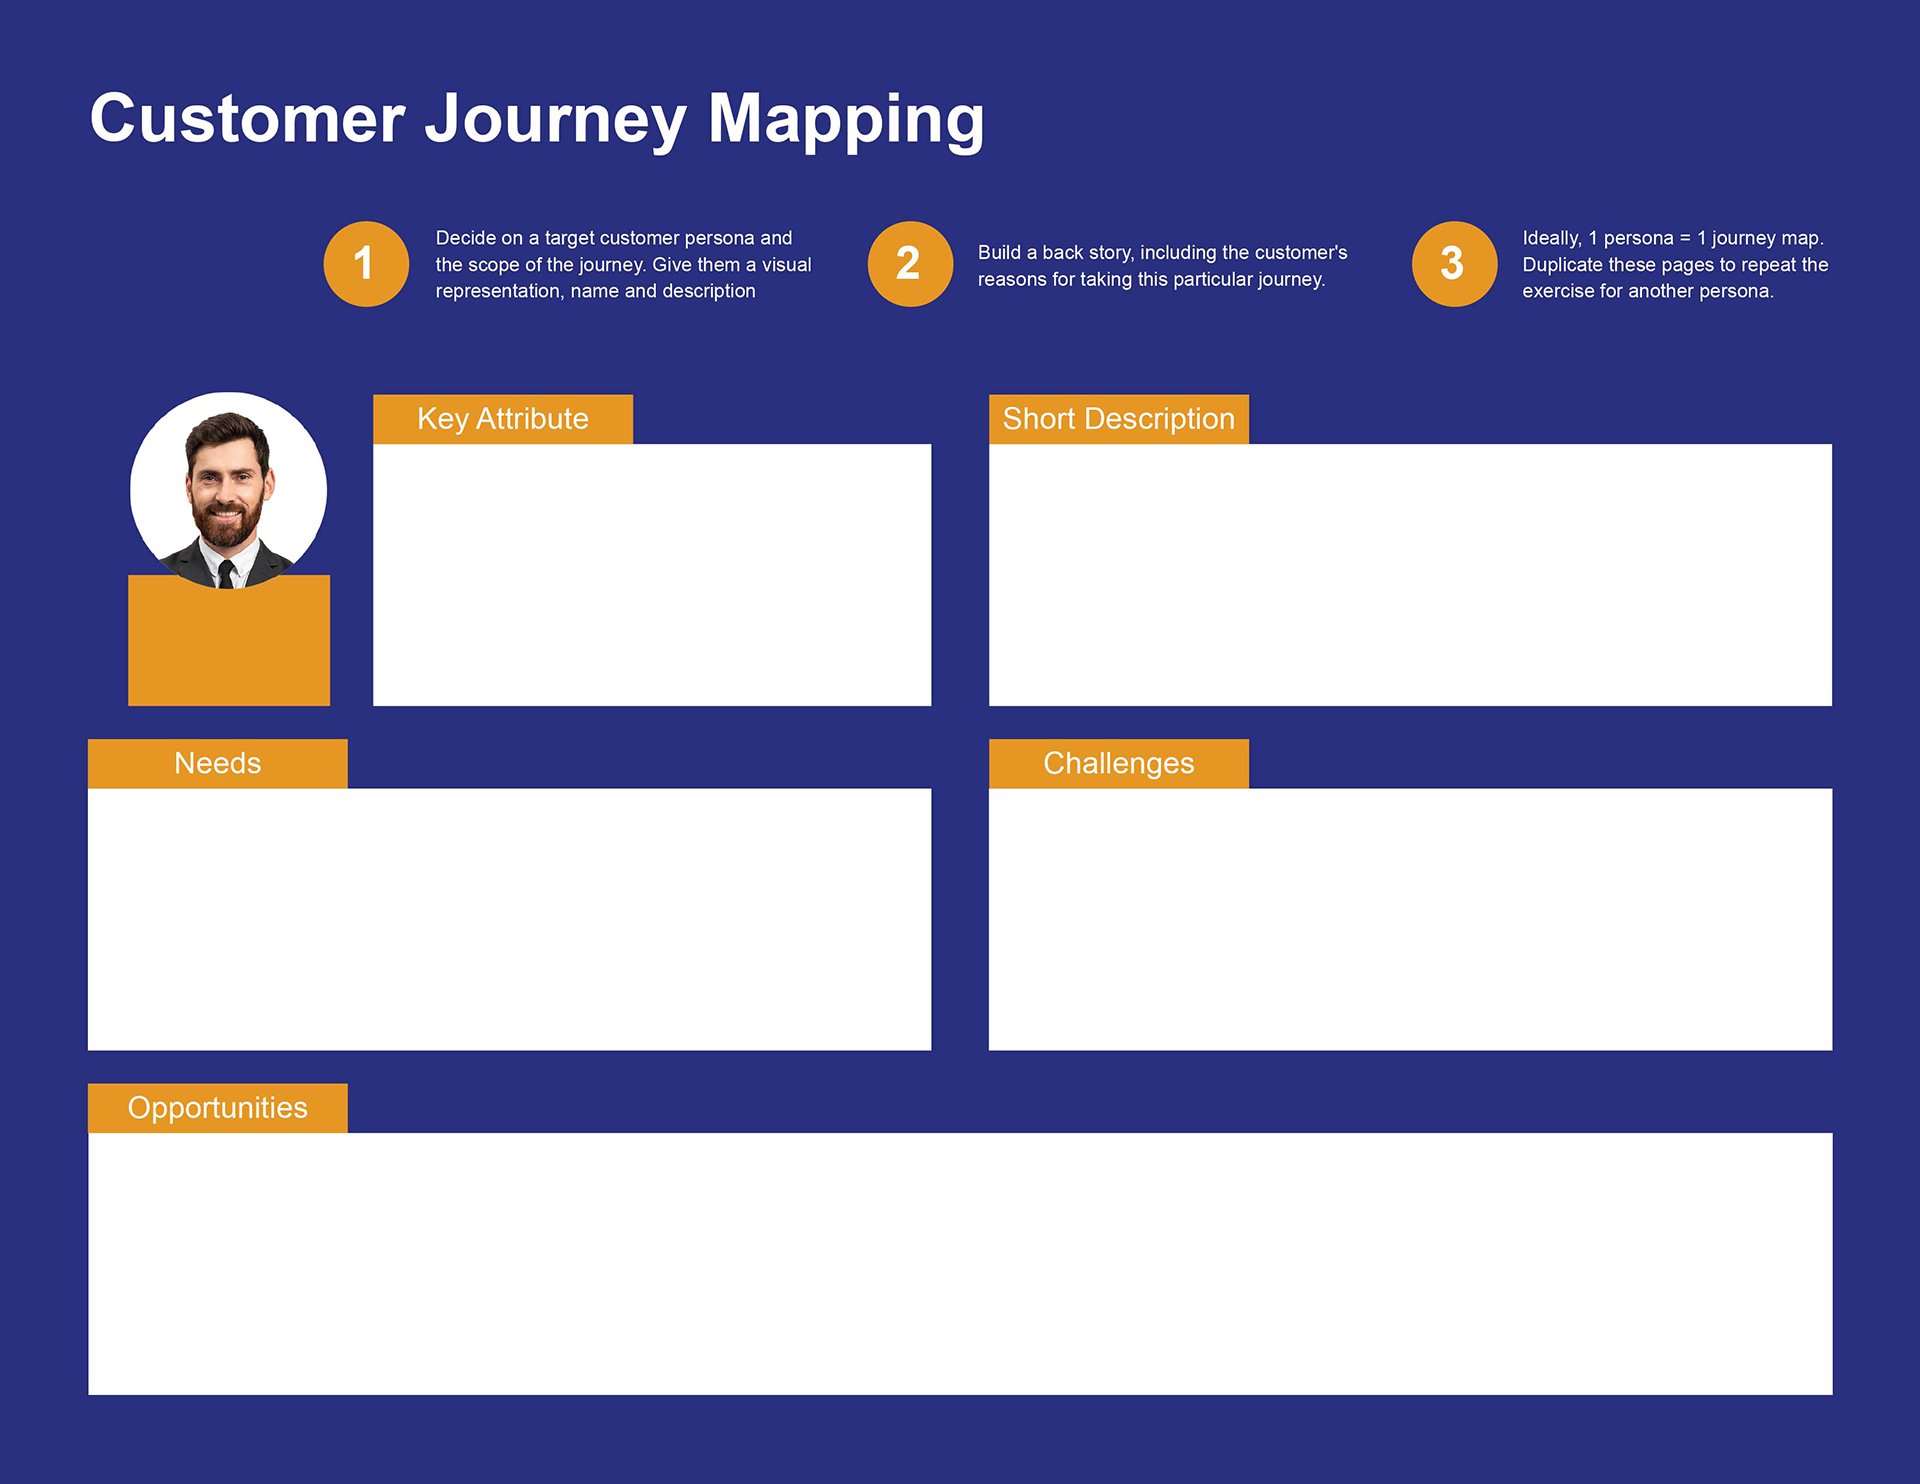 Customer Journey Mapping Image